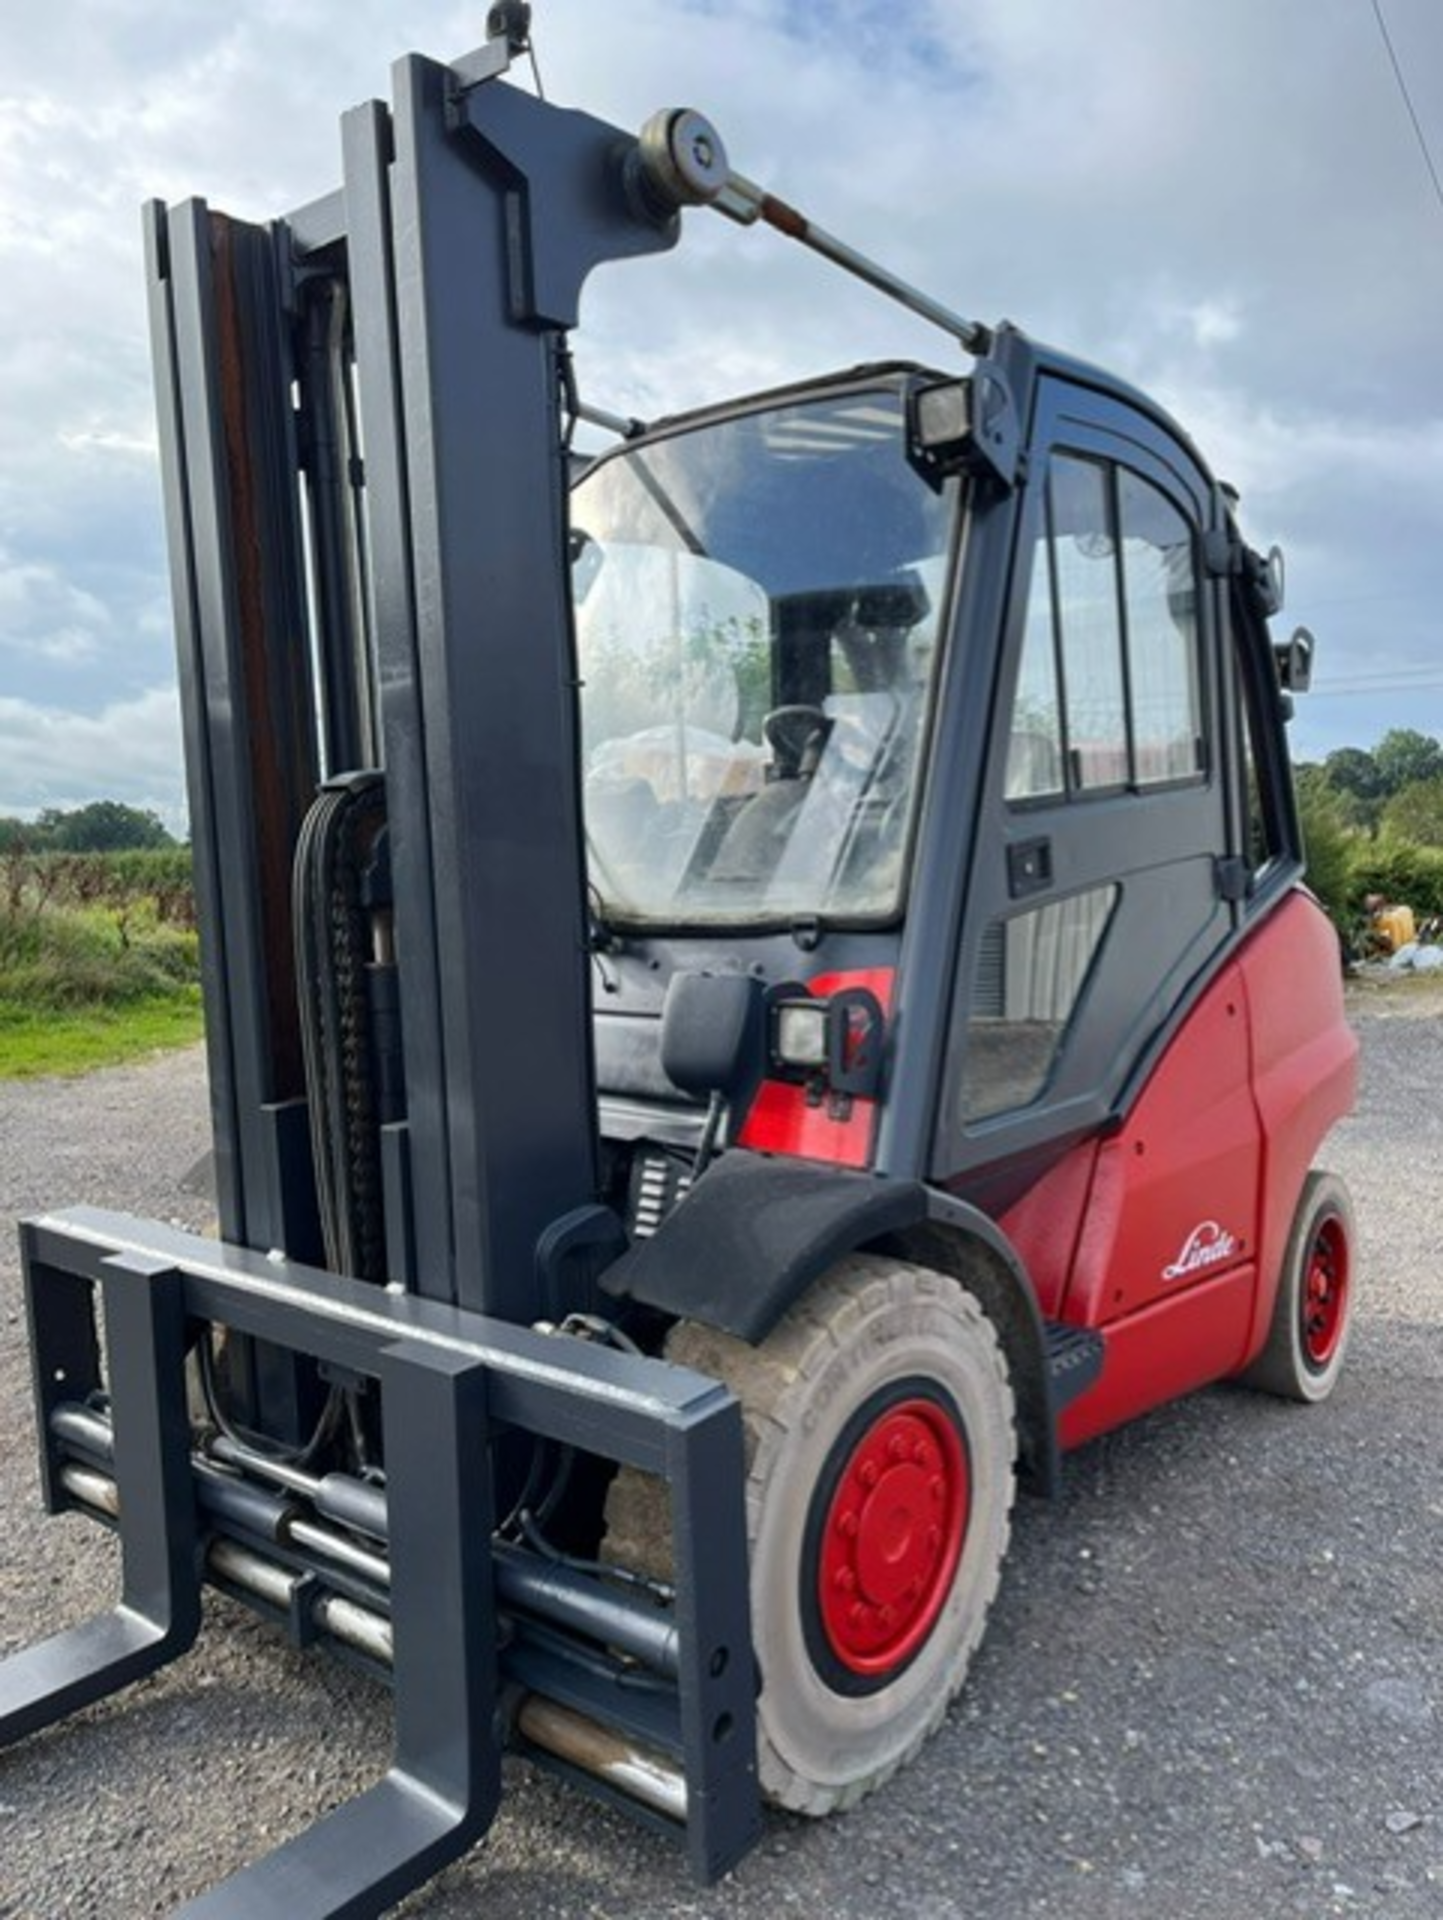 2007, LINDE H50T - 5 Tonne Gas Forklift (Ex Contract Hire)